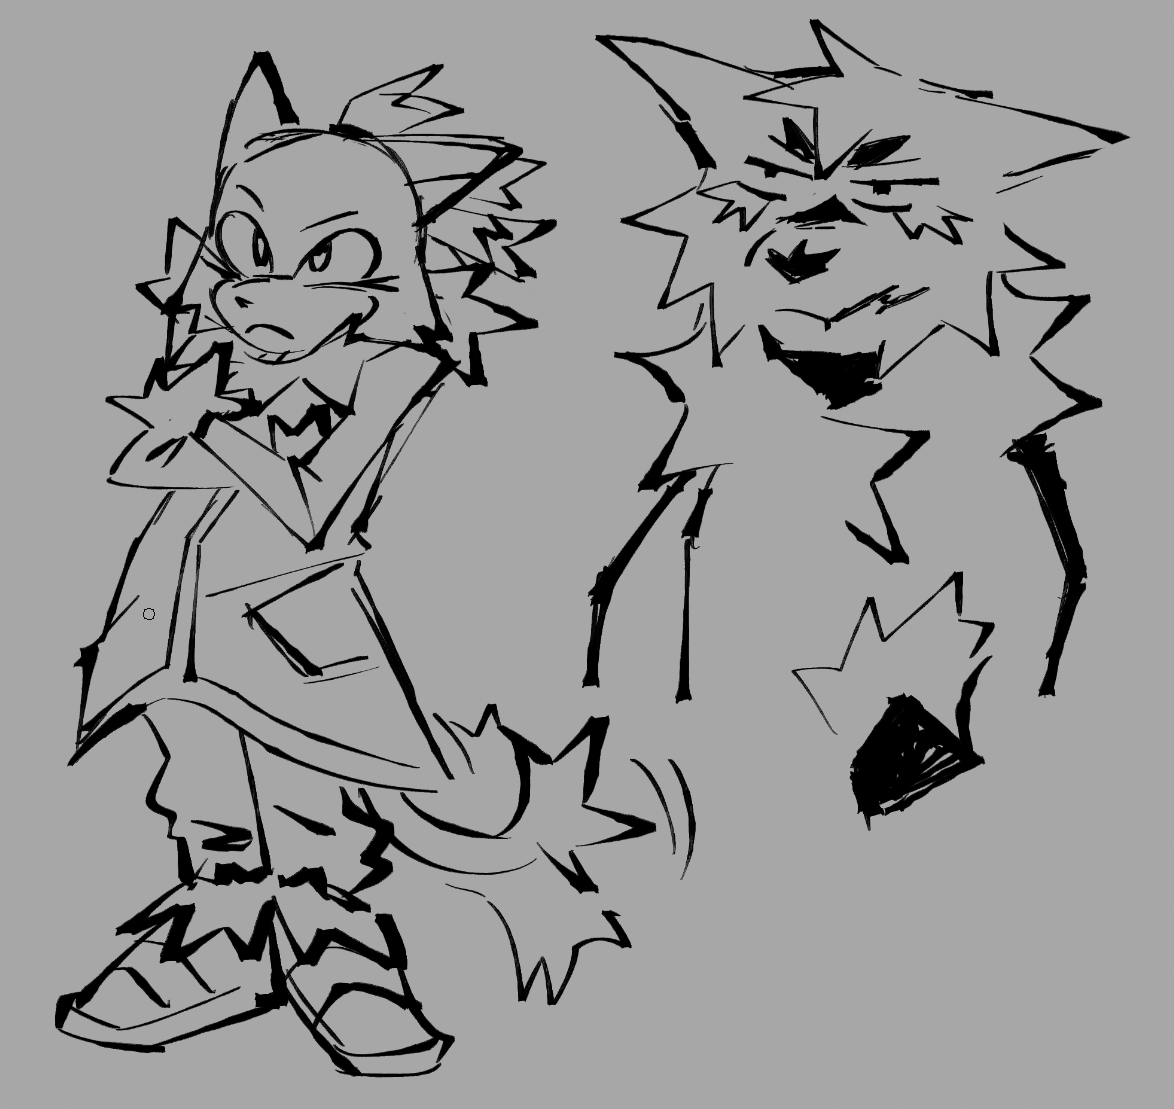 some stream sketches 